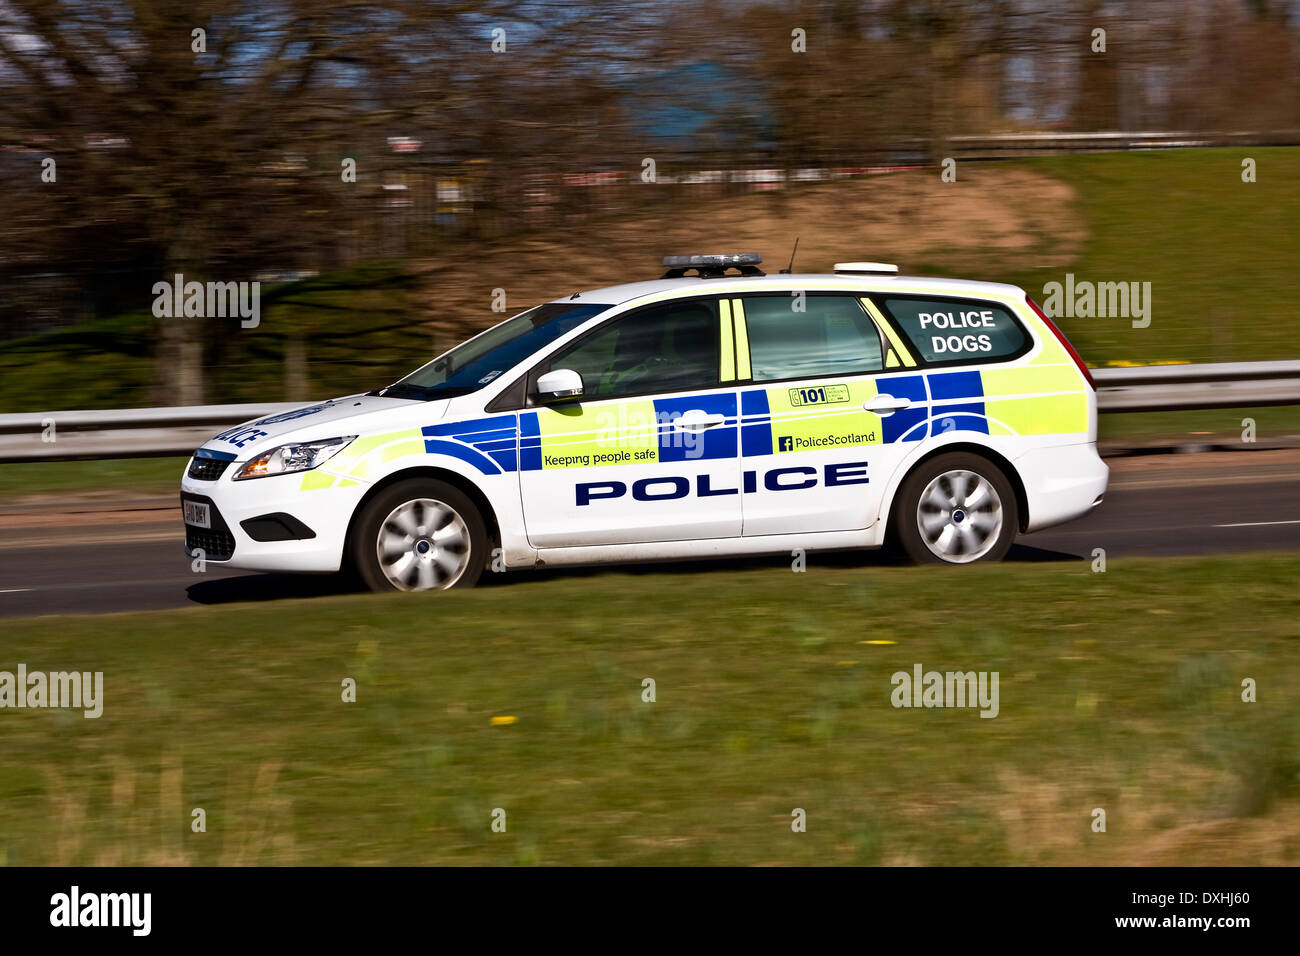 A Police Scotland Police Car responds to an emergency 999 call on Dundee's Kingsway West Dual Carriageway, Scotland Stock Photo